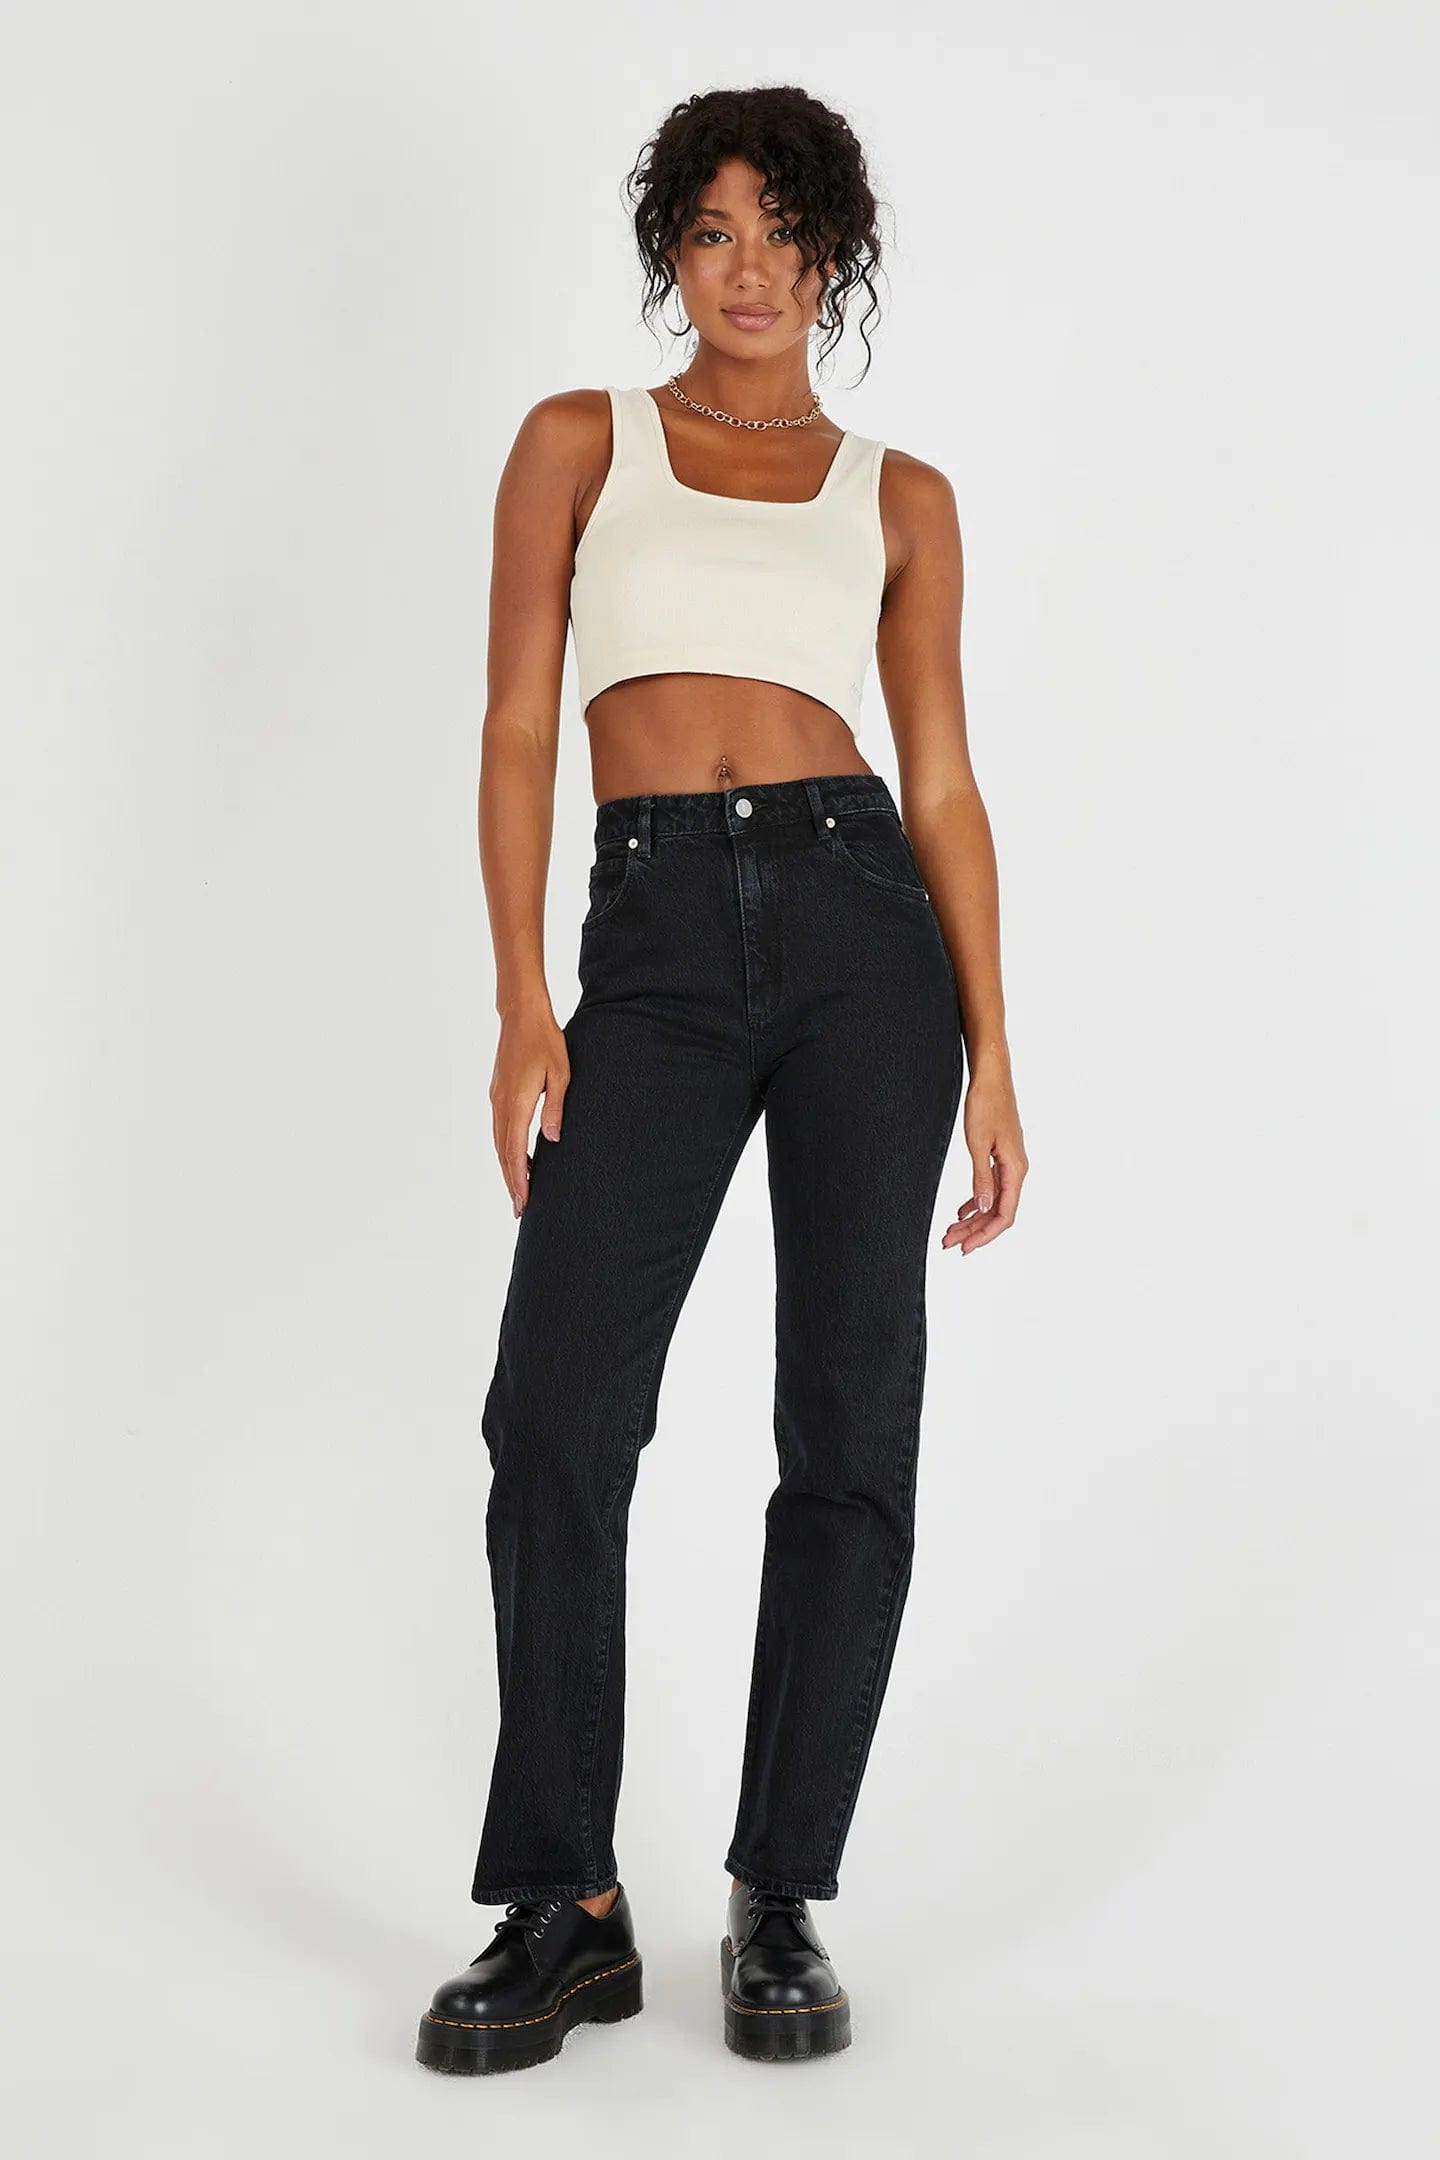 Abrand Jeans Jeans A 94 High Straight - Chelsea Organic Black